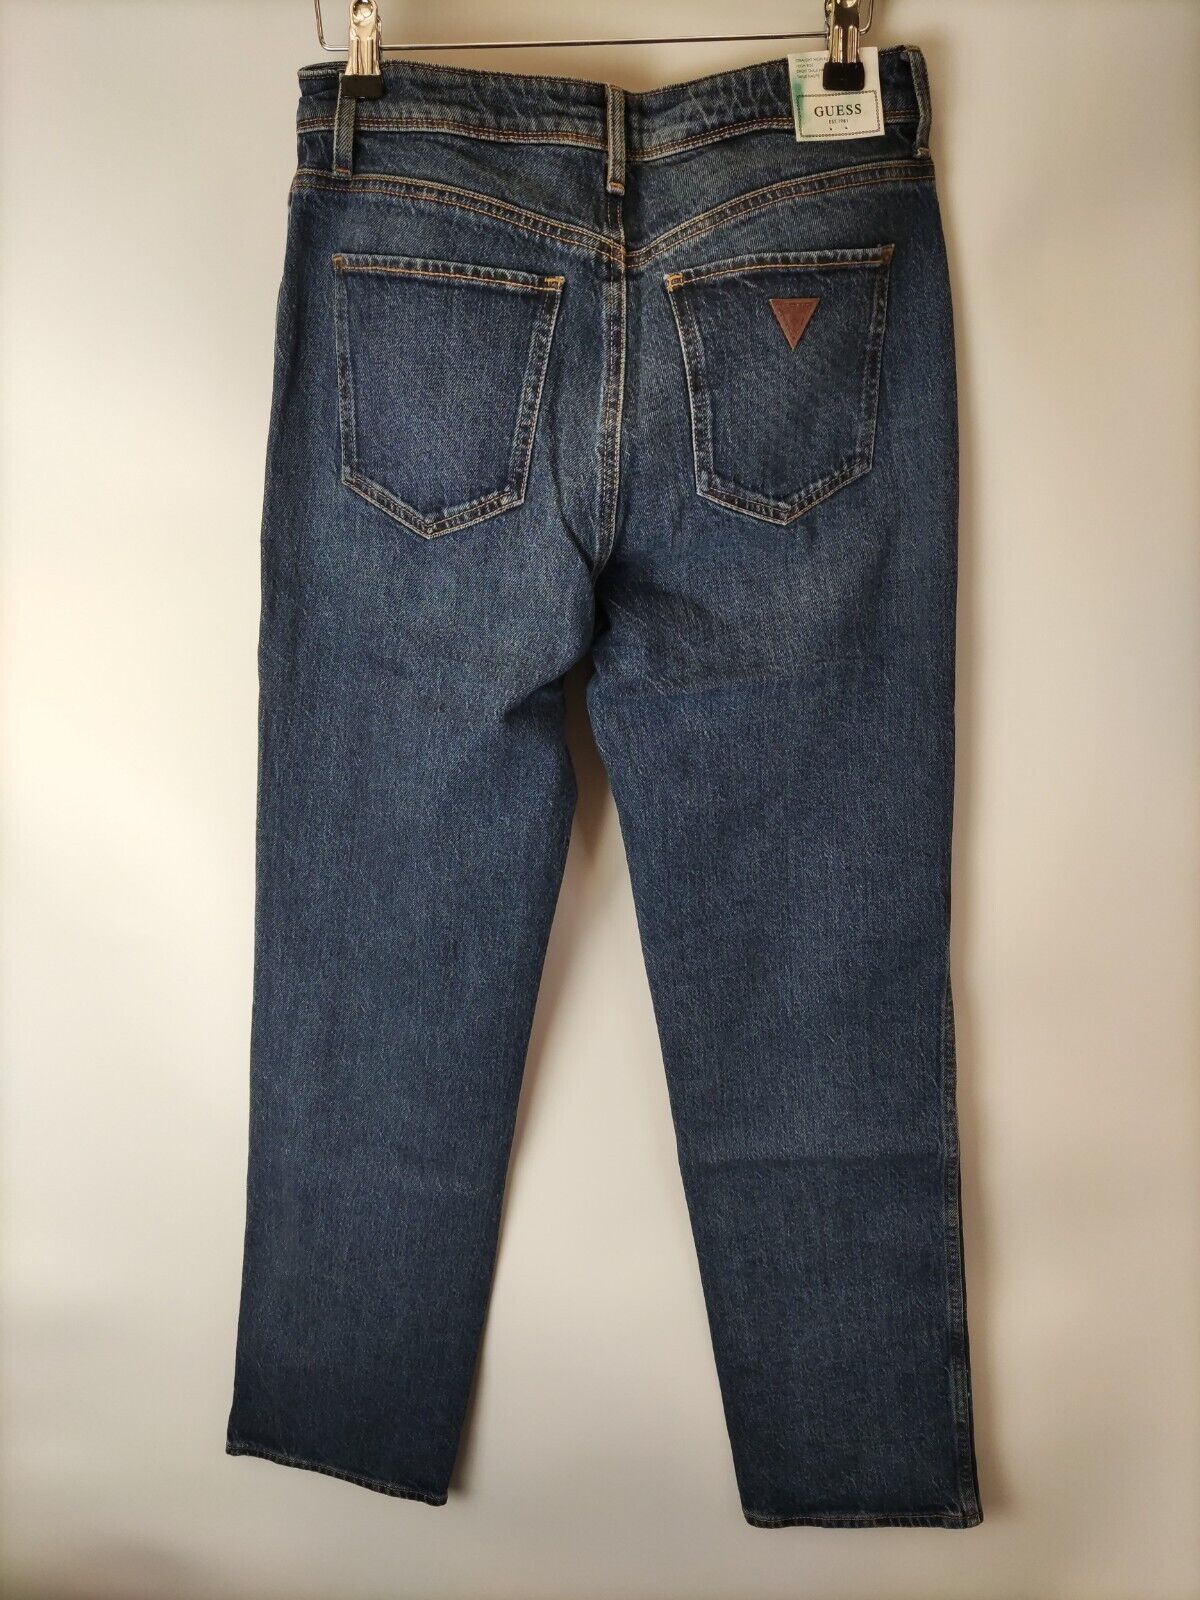 Guess 1981 Straight Leg Jean With Buckle Detail. Navy. Size 28W. ****V261